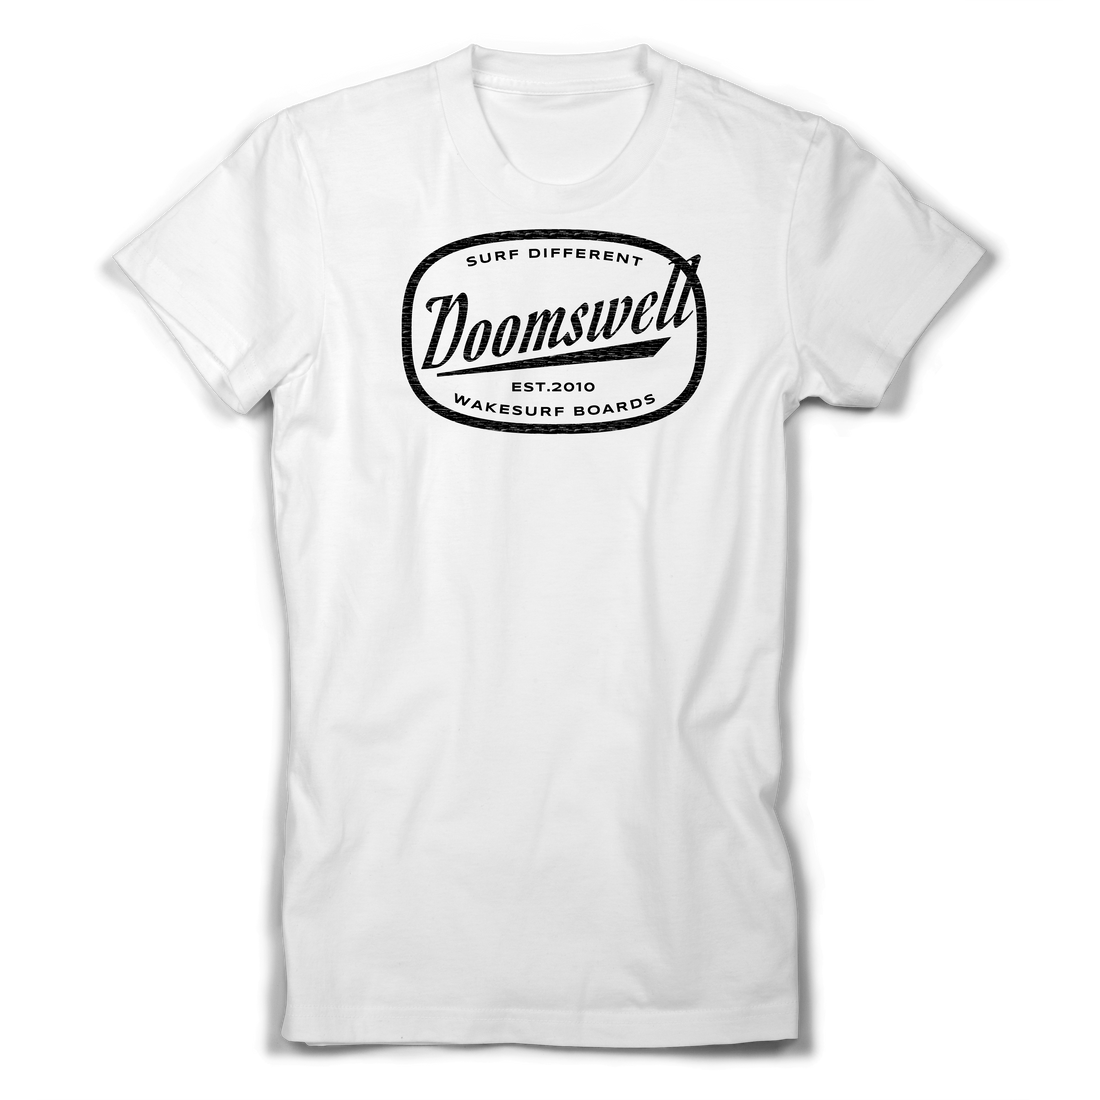 Doomswell white oval tshirt